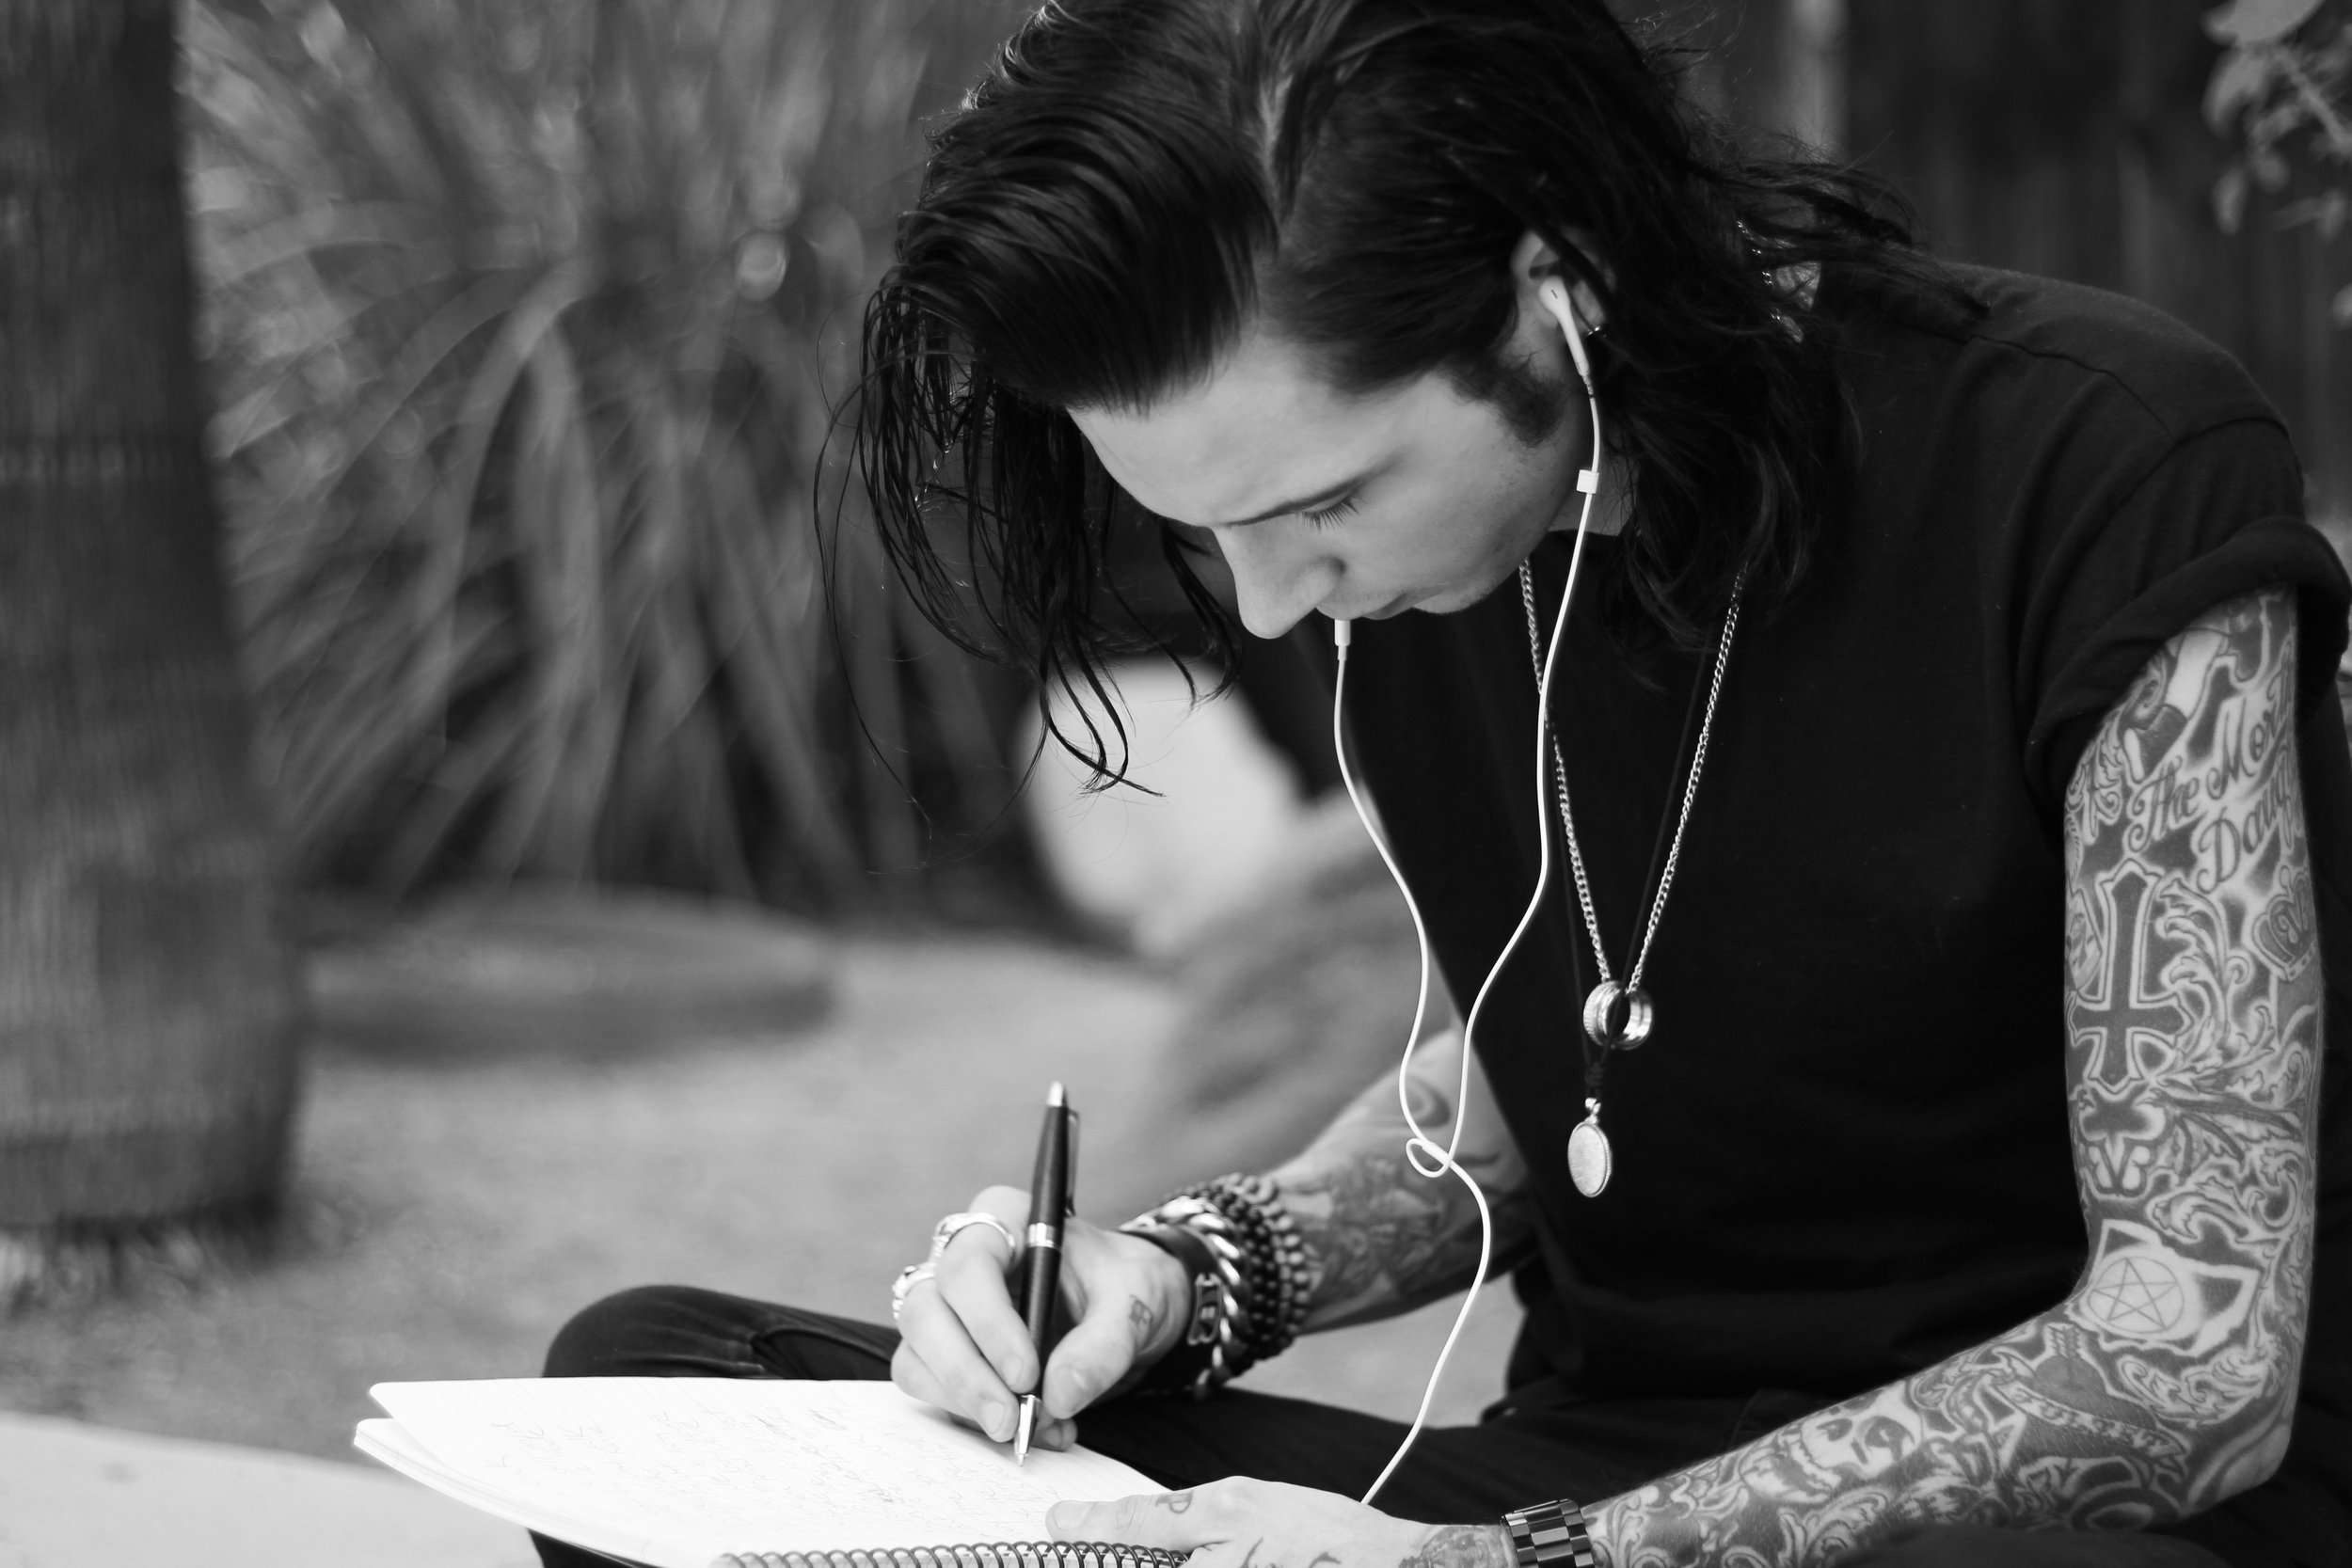  Andy Black writing lyrics for debut solo albm “The Shadow Side” 